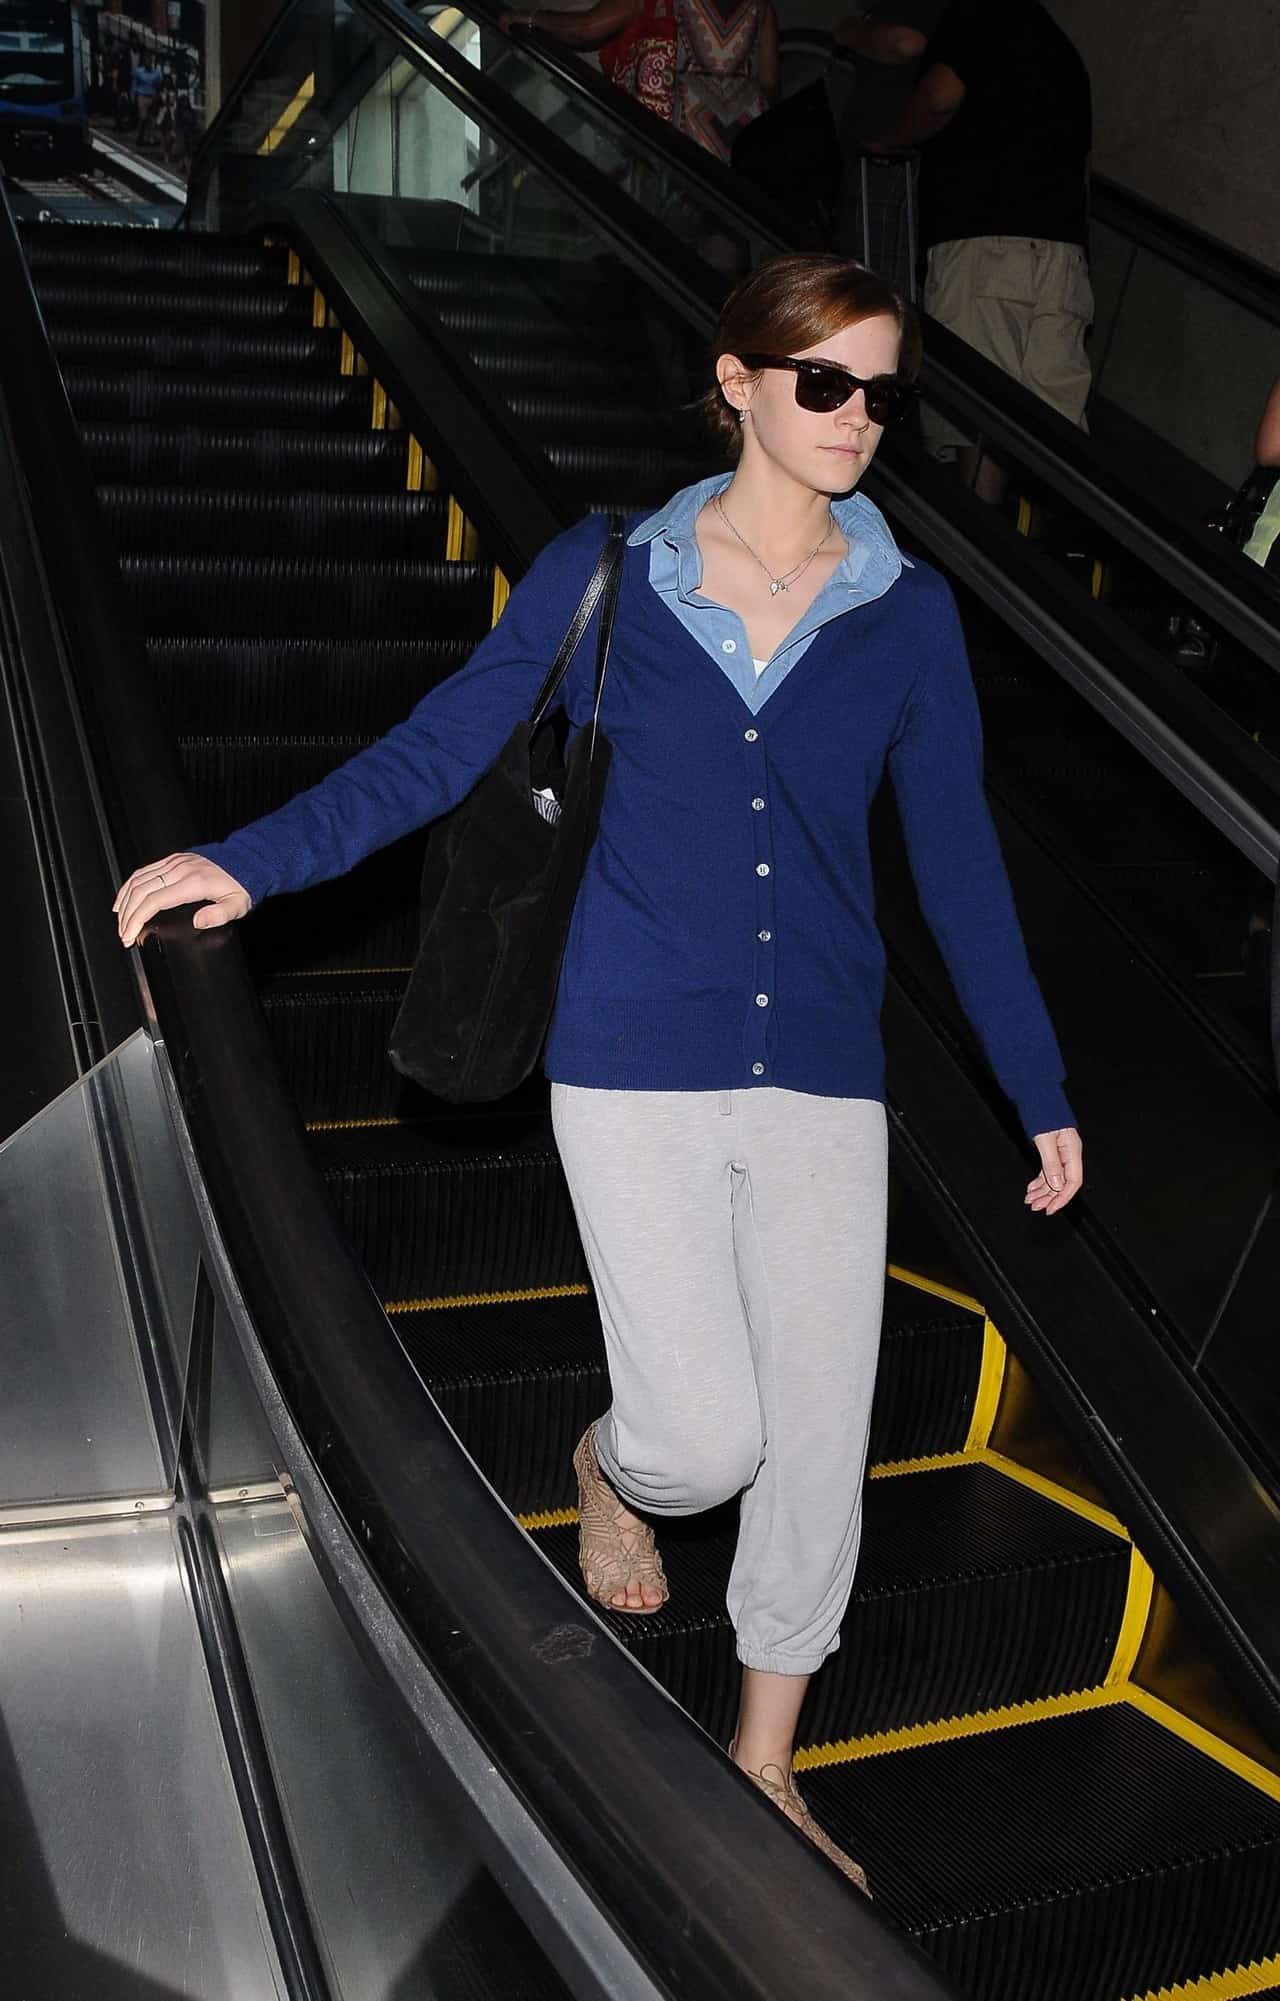 Emma Watson Spotted Leaving LAX Airport in Comfortable Yet Stylish Outfit